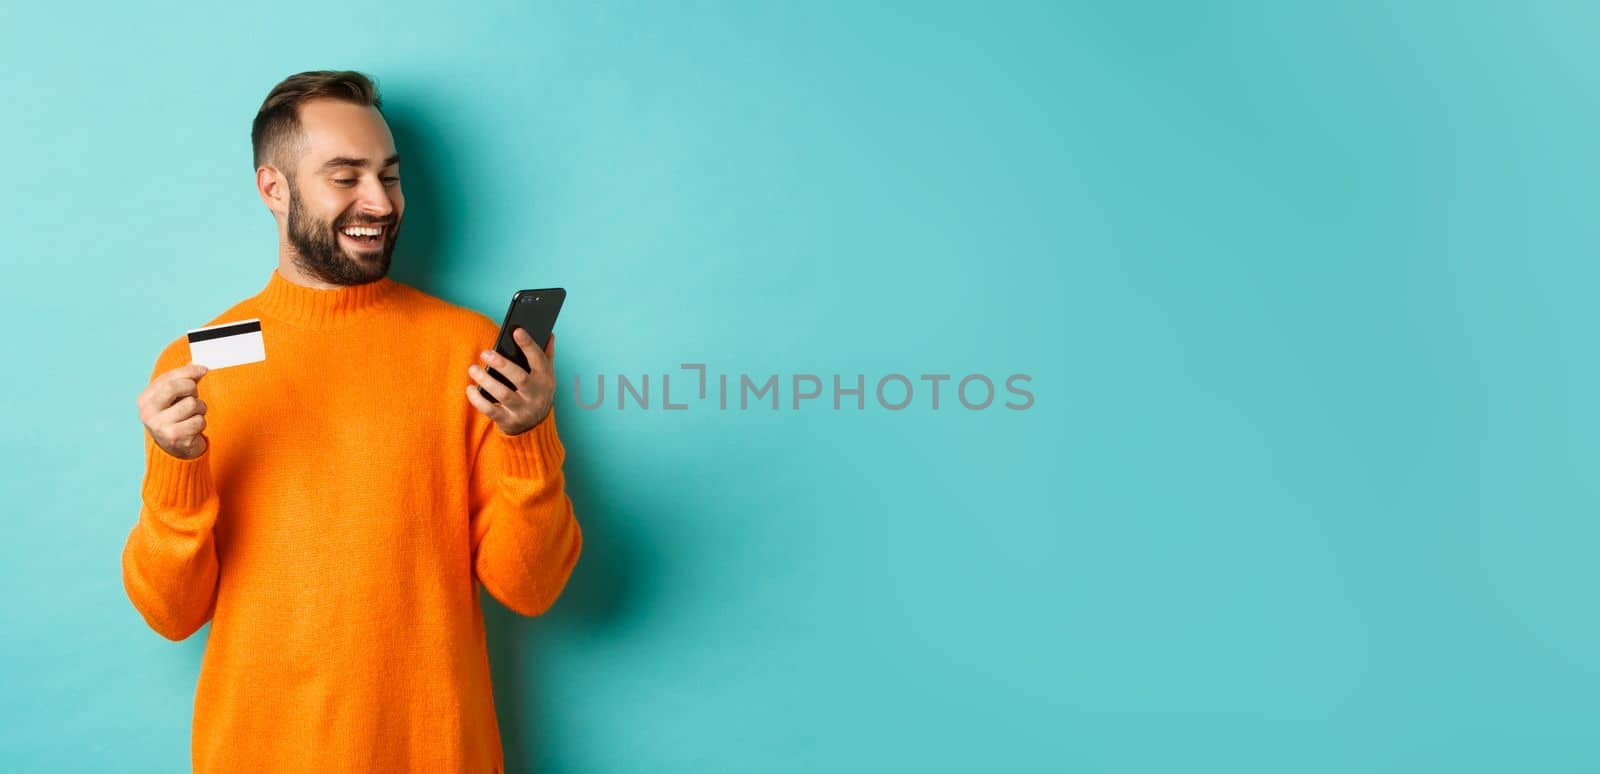 Online shopping. Handsome bearded man paying in internet, holding credit card and stare at mobile screen, standing over turquoise background.